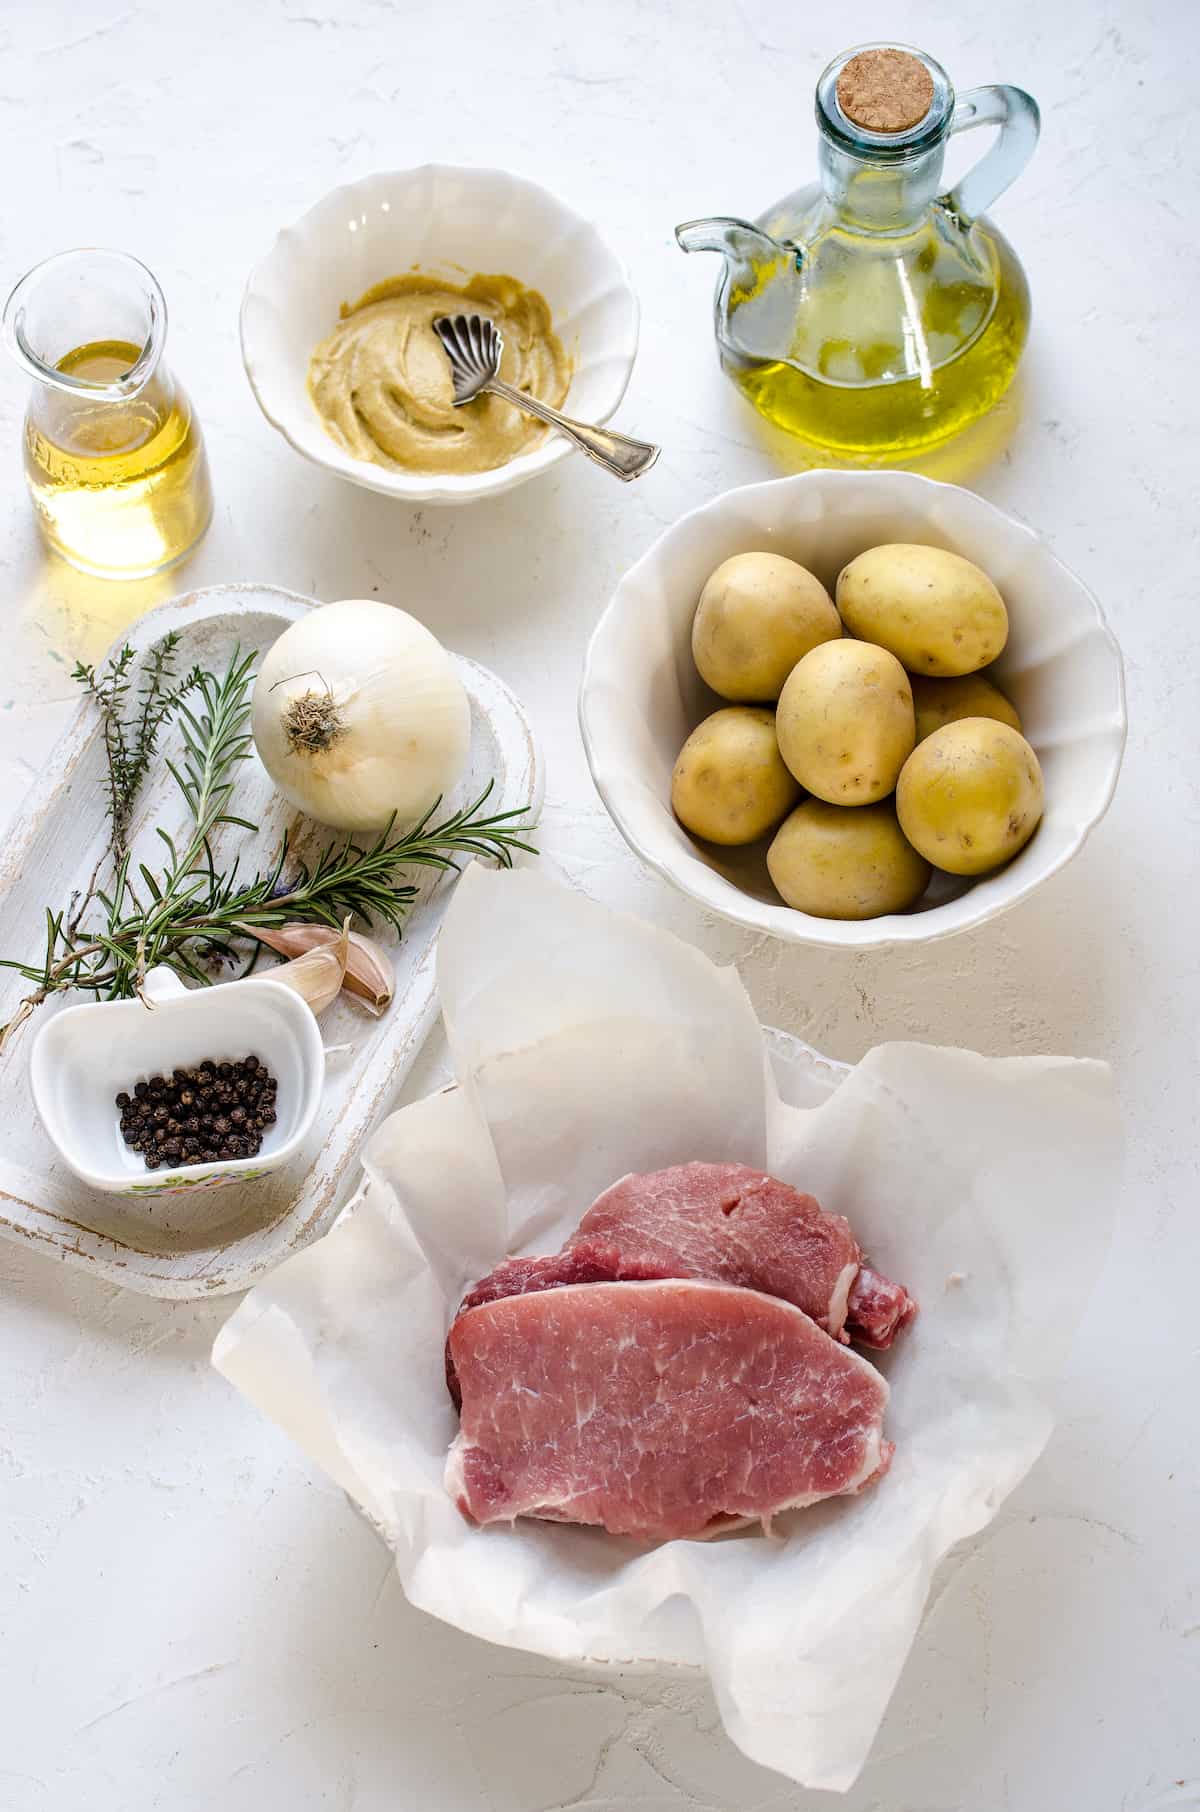 Baby potatoes, raw pork chops, olive oil and the rest of the ingredients on a kitchen countertop